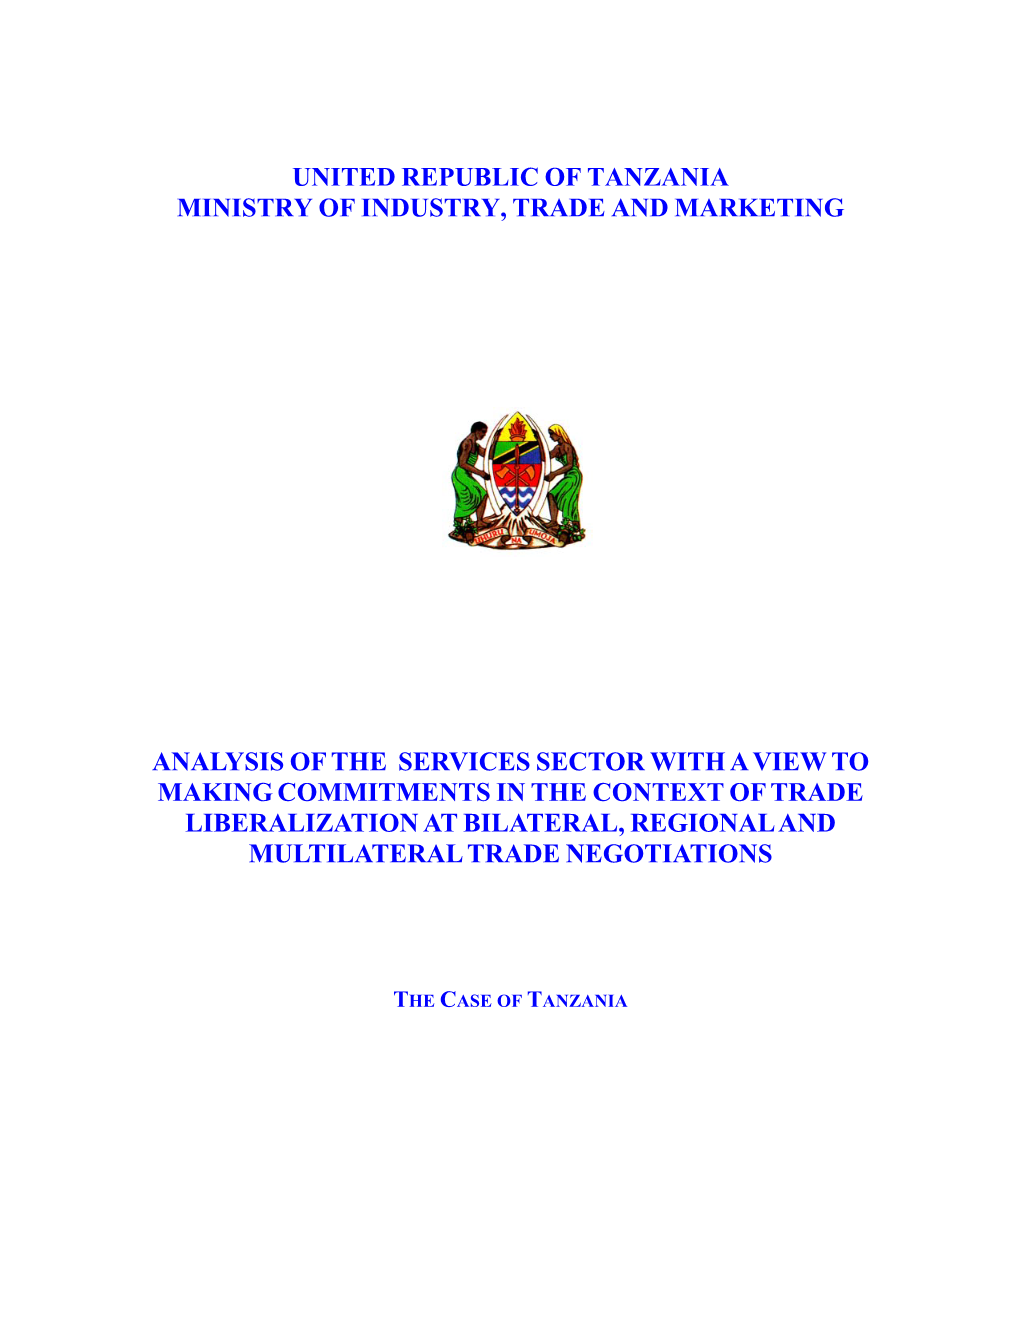 United Republic of Tanzania Ministry of Industry, Trade and Marketing